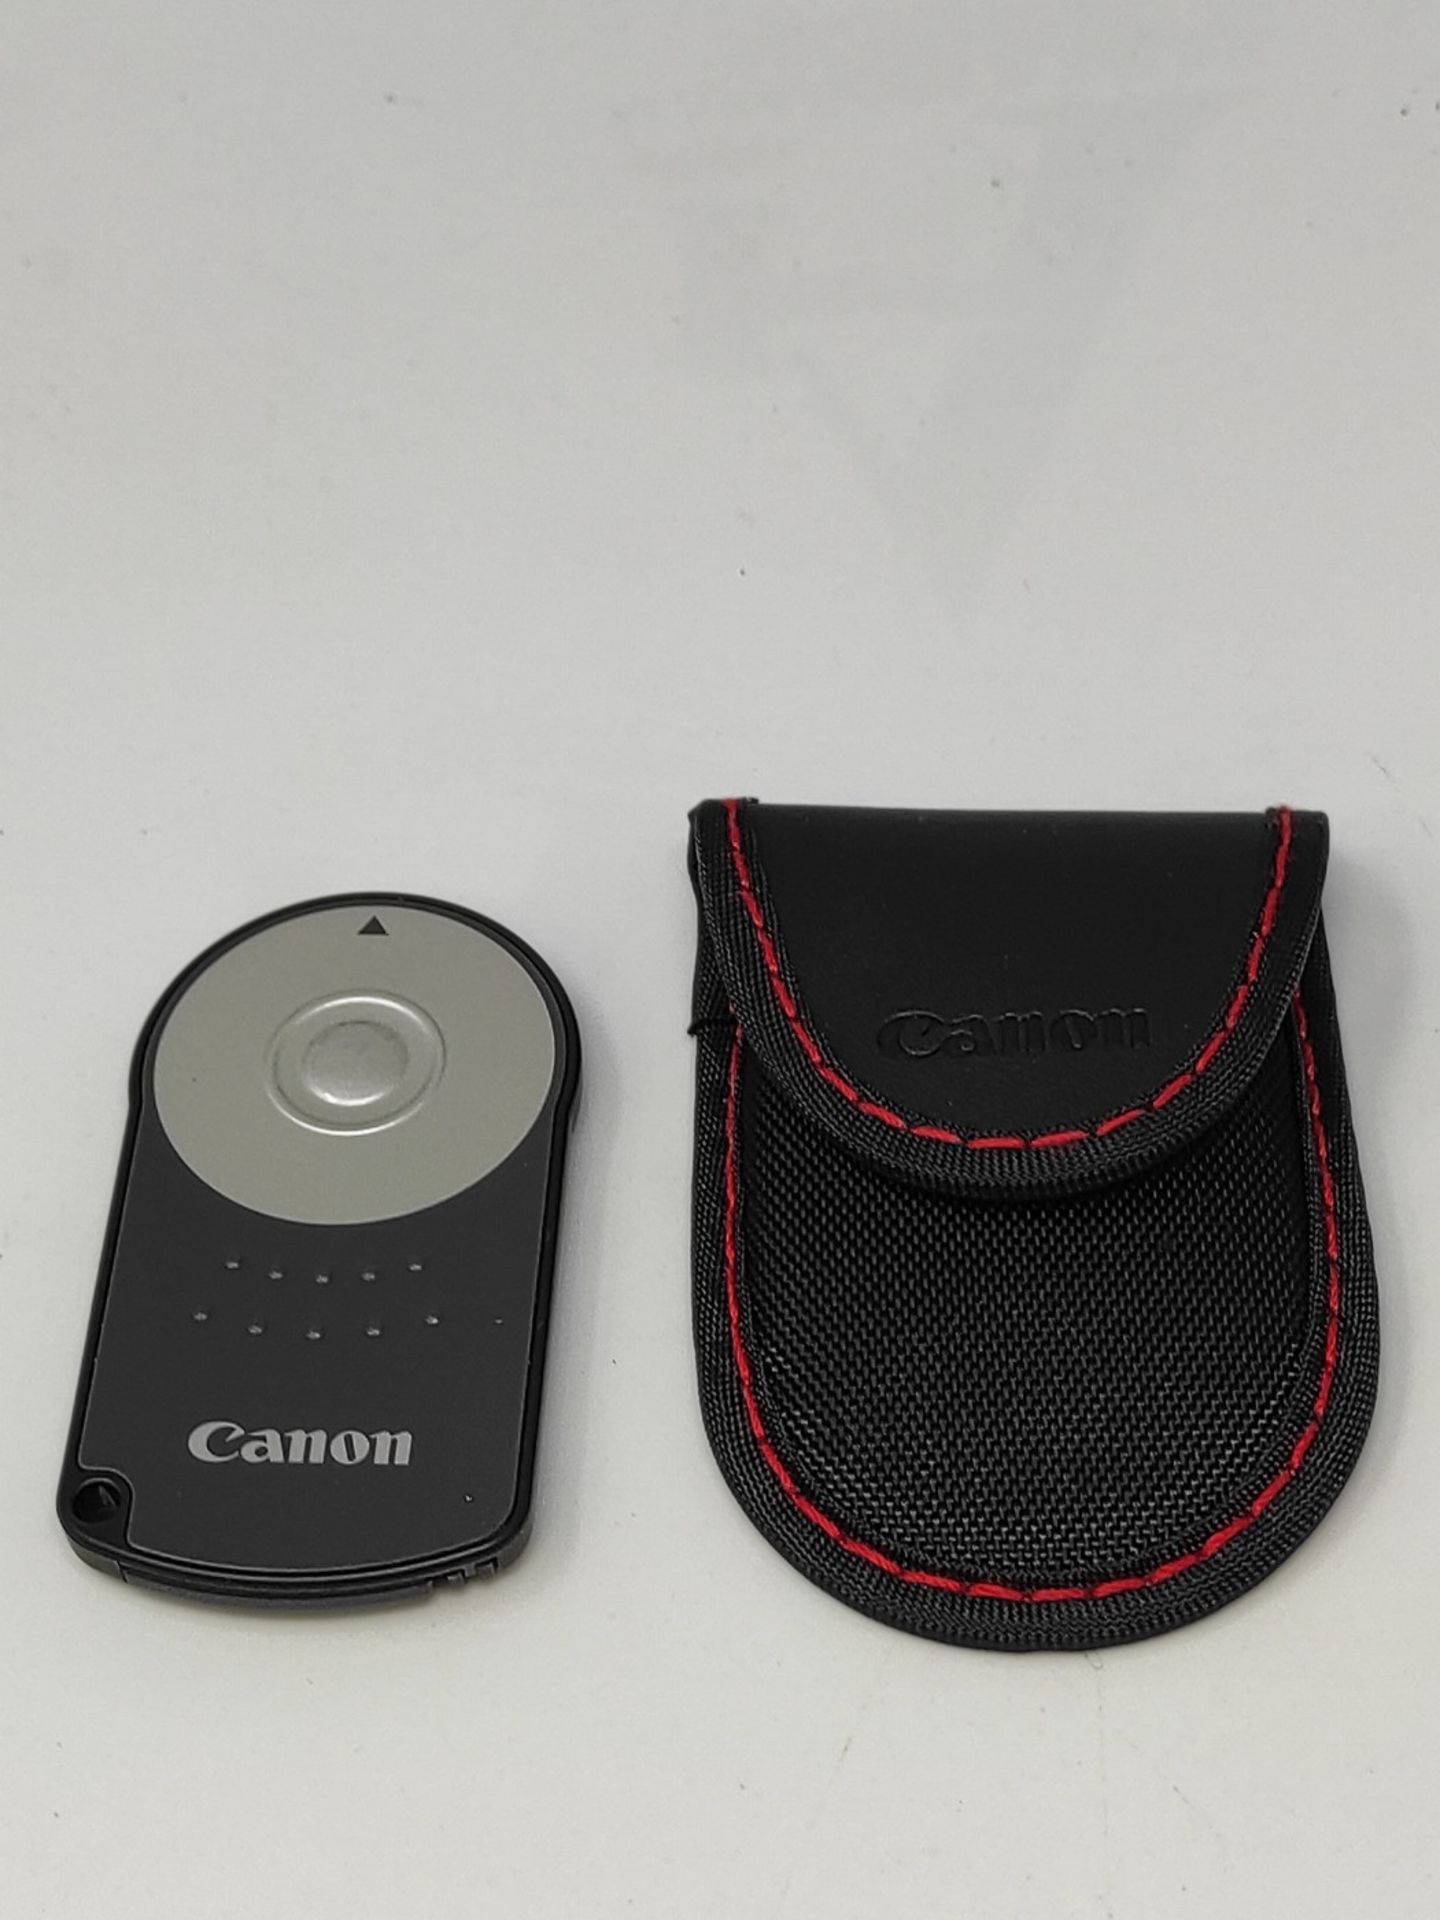 Canon RC-6 Infrared Remote Control - Image 3 of 3